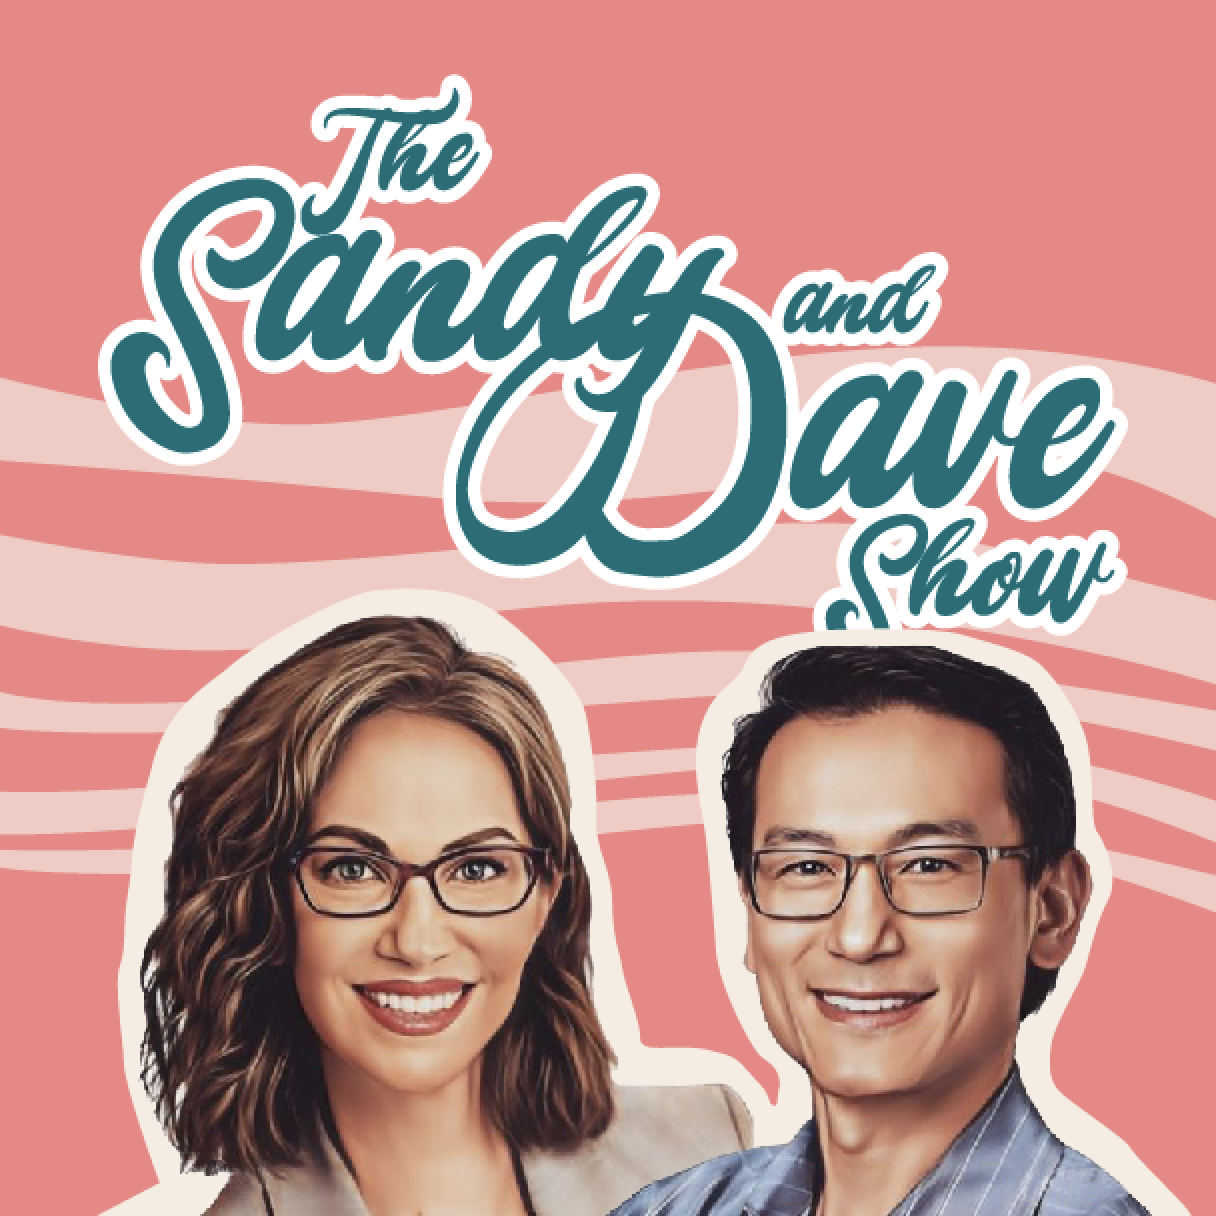 The Sandy and Dave Show: Ep 9: Closing a Session